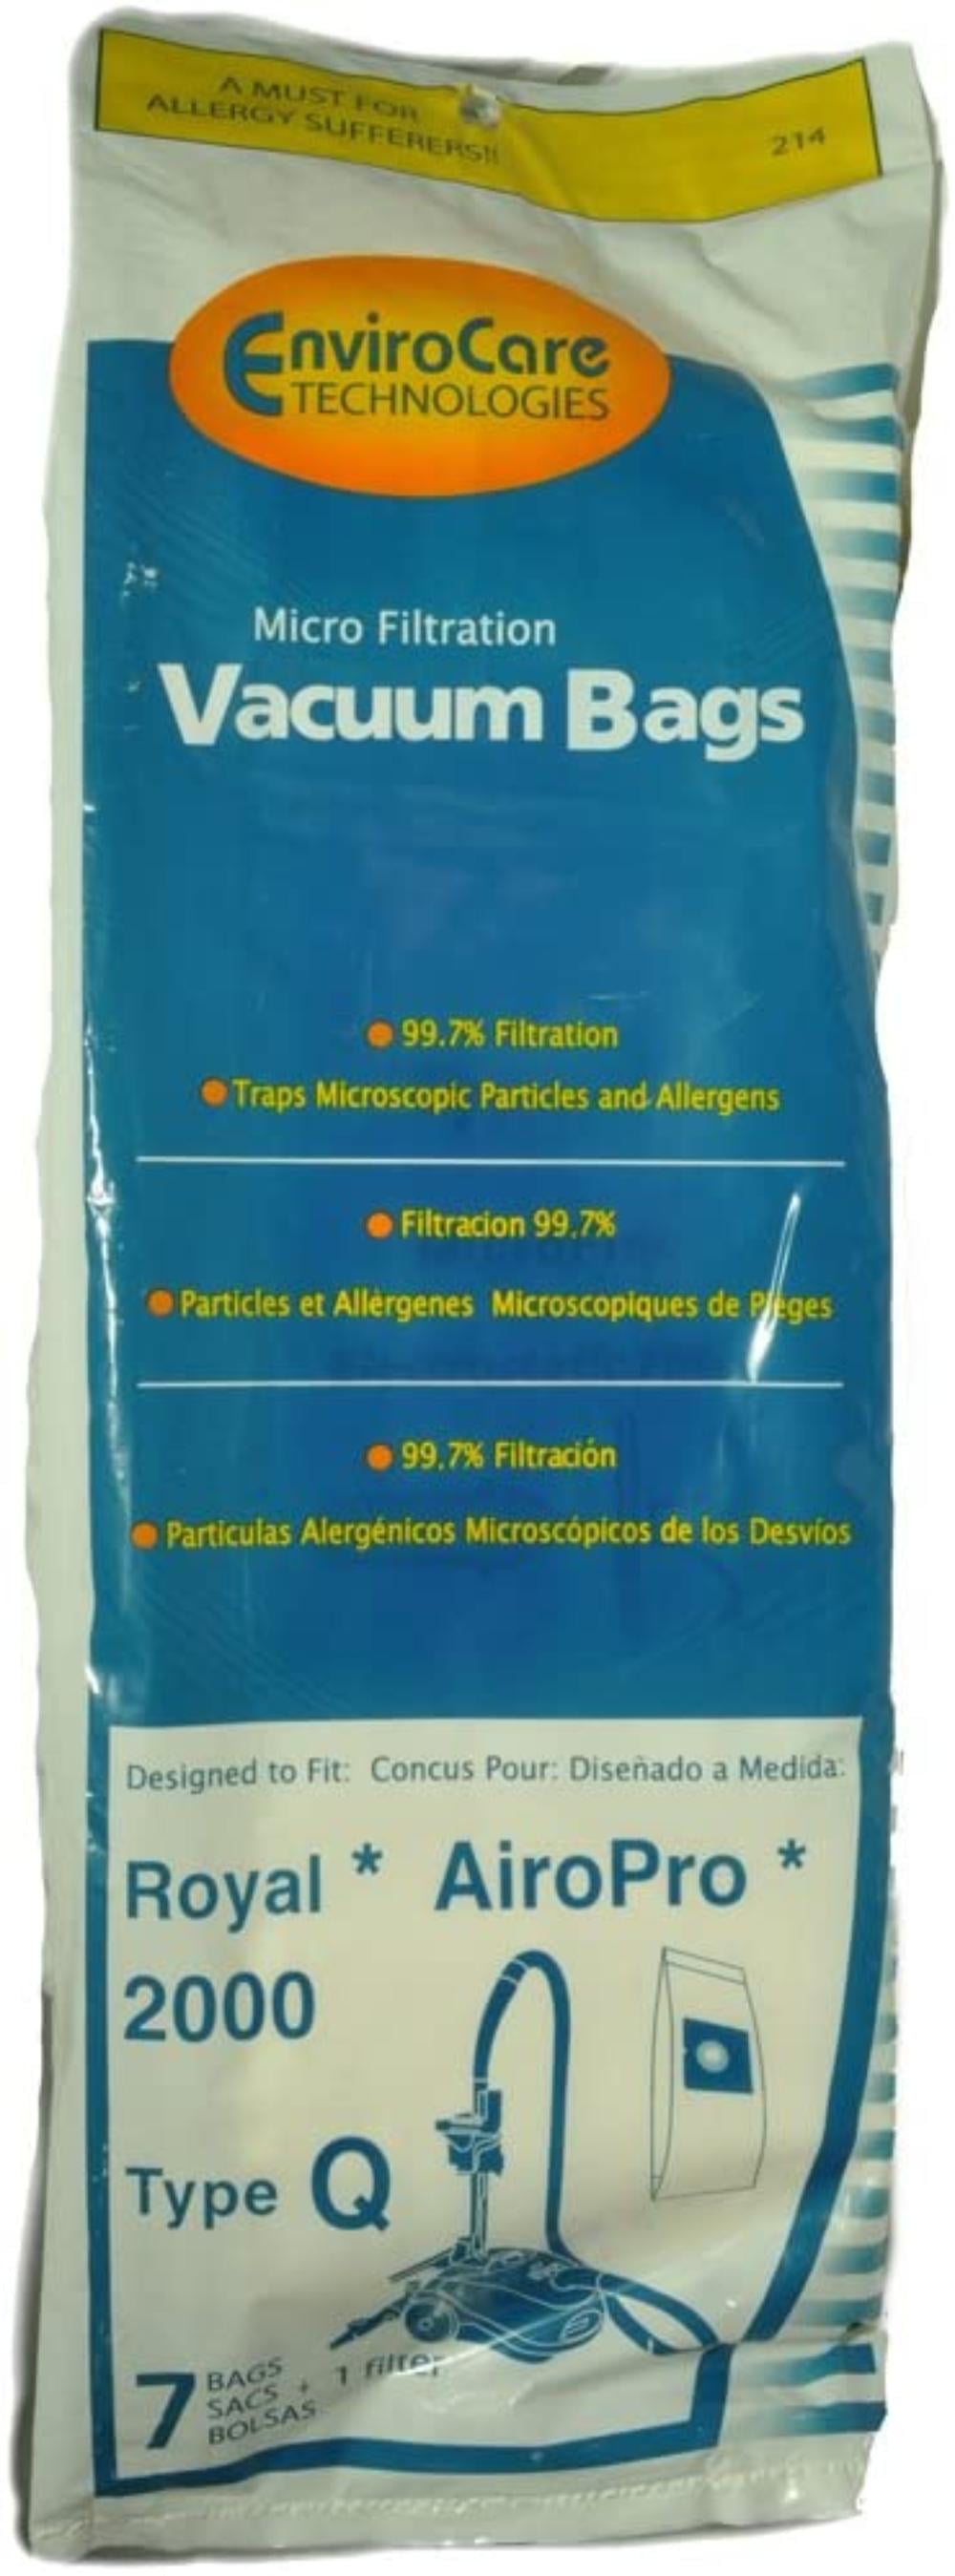 325 Hoover Canister Vacuum Cleaner 99.7 Microfiltration Type SR Bags 3 Pk Part 